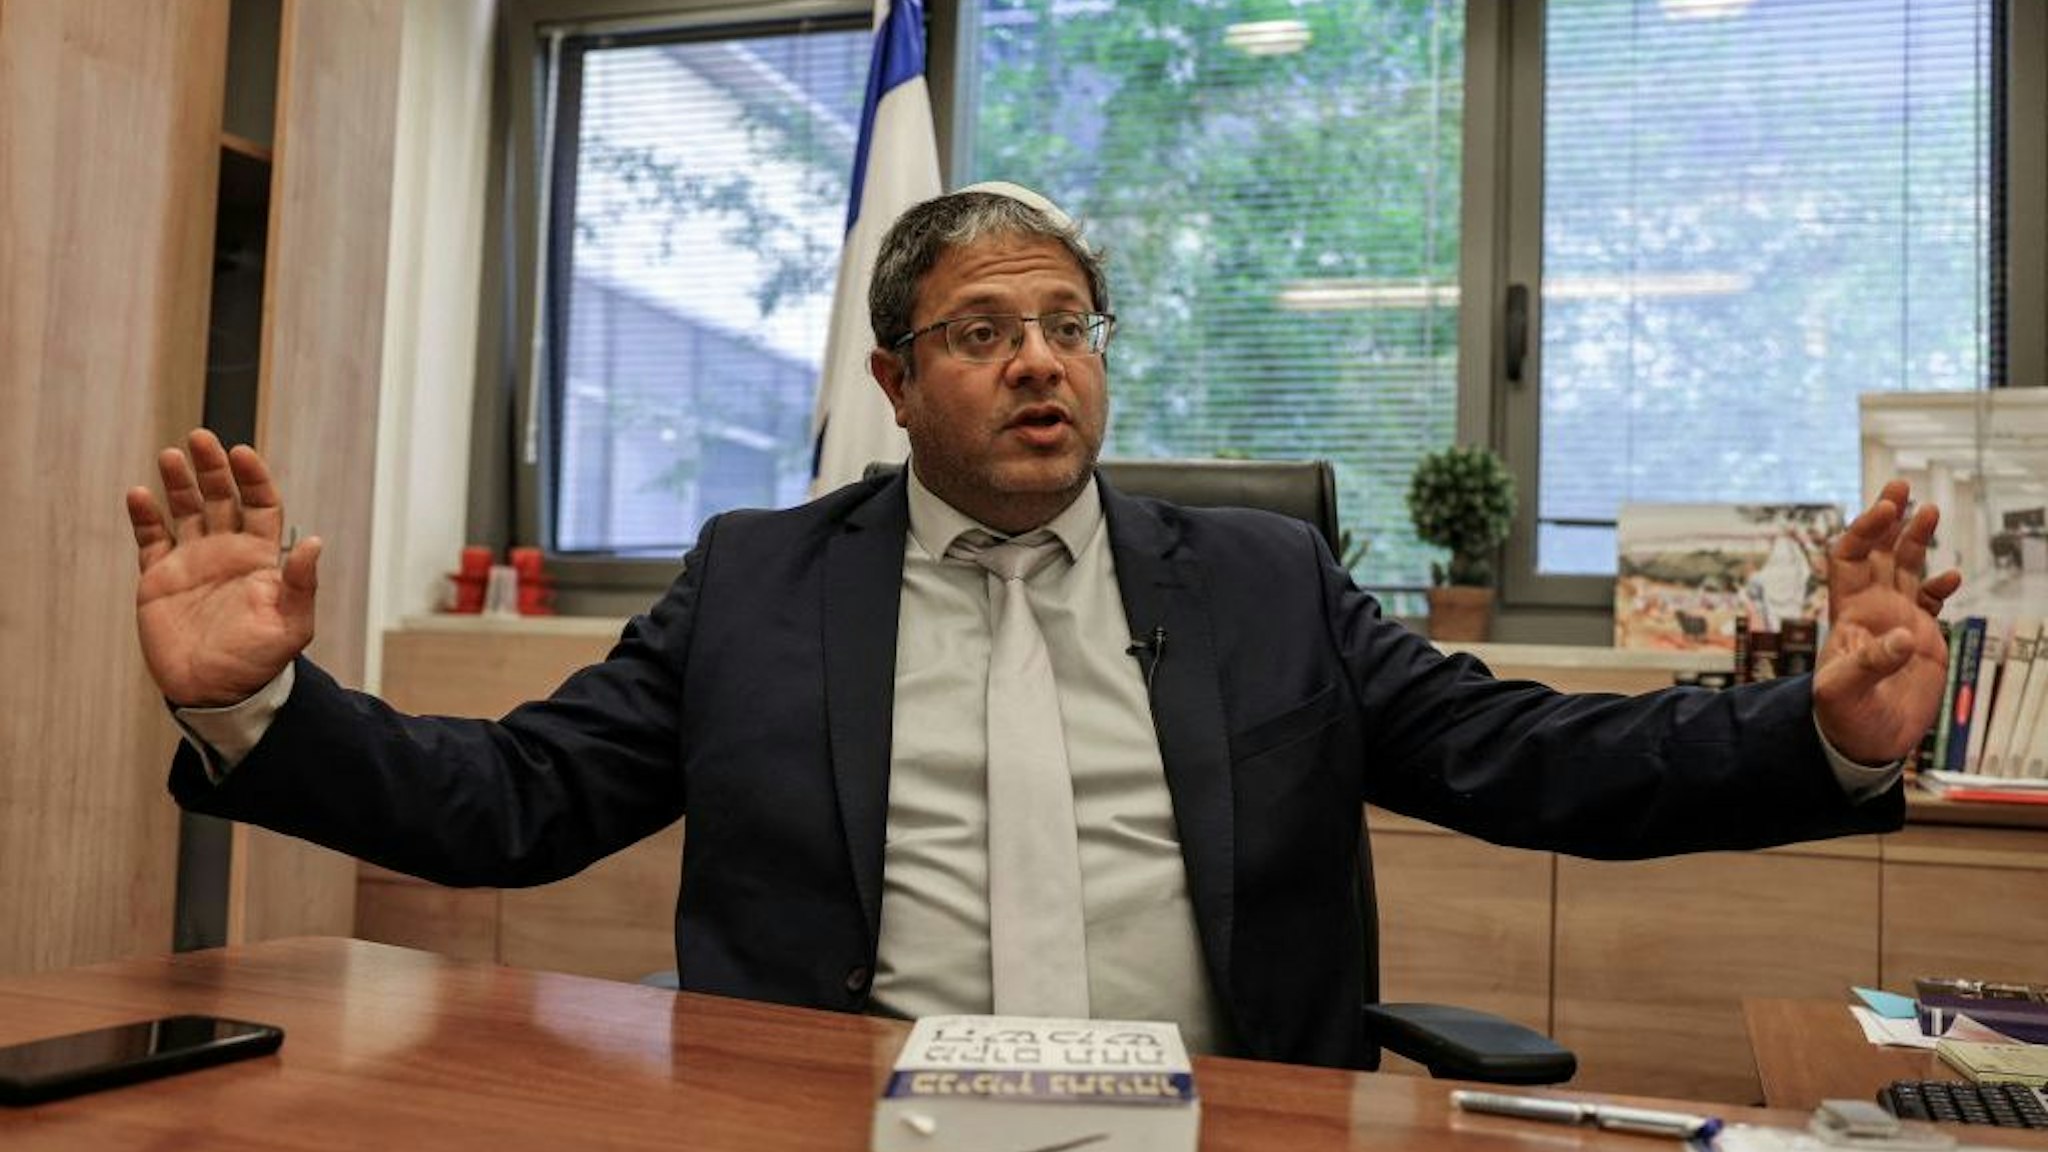 Itamar Ben-Gvir, member of Israel's Knesset (parliament) and head of the one-man far right "Jewish Power" (Otzma Yehudit) party, gives an interview with AFP at his office in the Knesset building in Jerusalem on May 26, 2021. - As Israelis clashed with Palestinians in recent weeks, the hardline nationalist lawmaker allied with embattled Prime Minister Benjamin Netanyahu was repeatedly stoking the flames. The 45-year-old lawyer and father of six, who lives in a settlement near Hebron in the Israel-occupied West Bank, took his seat in the Knesset in April as part of a "Religious Zionism" alliance orchestrated by Netanyahu. (Photo by Menahem KAHANA / AFP) (Photo by MENAHEM KAHANA/AFP via Getty Images)